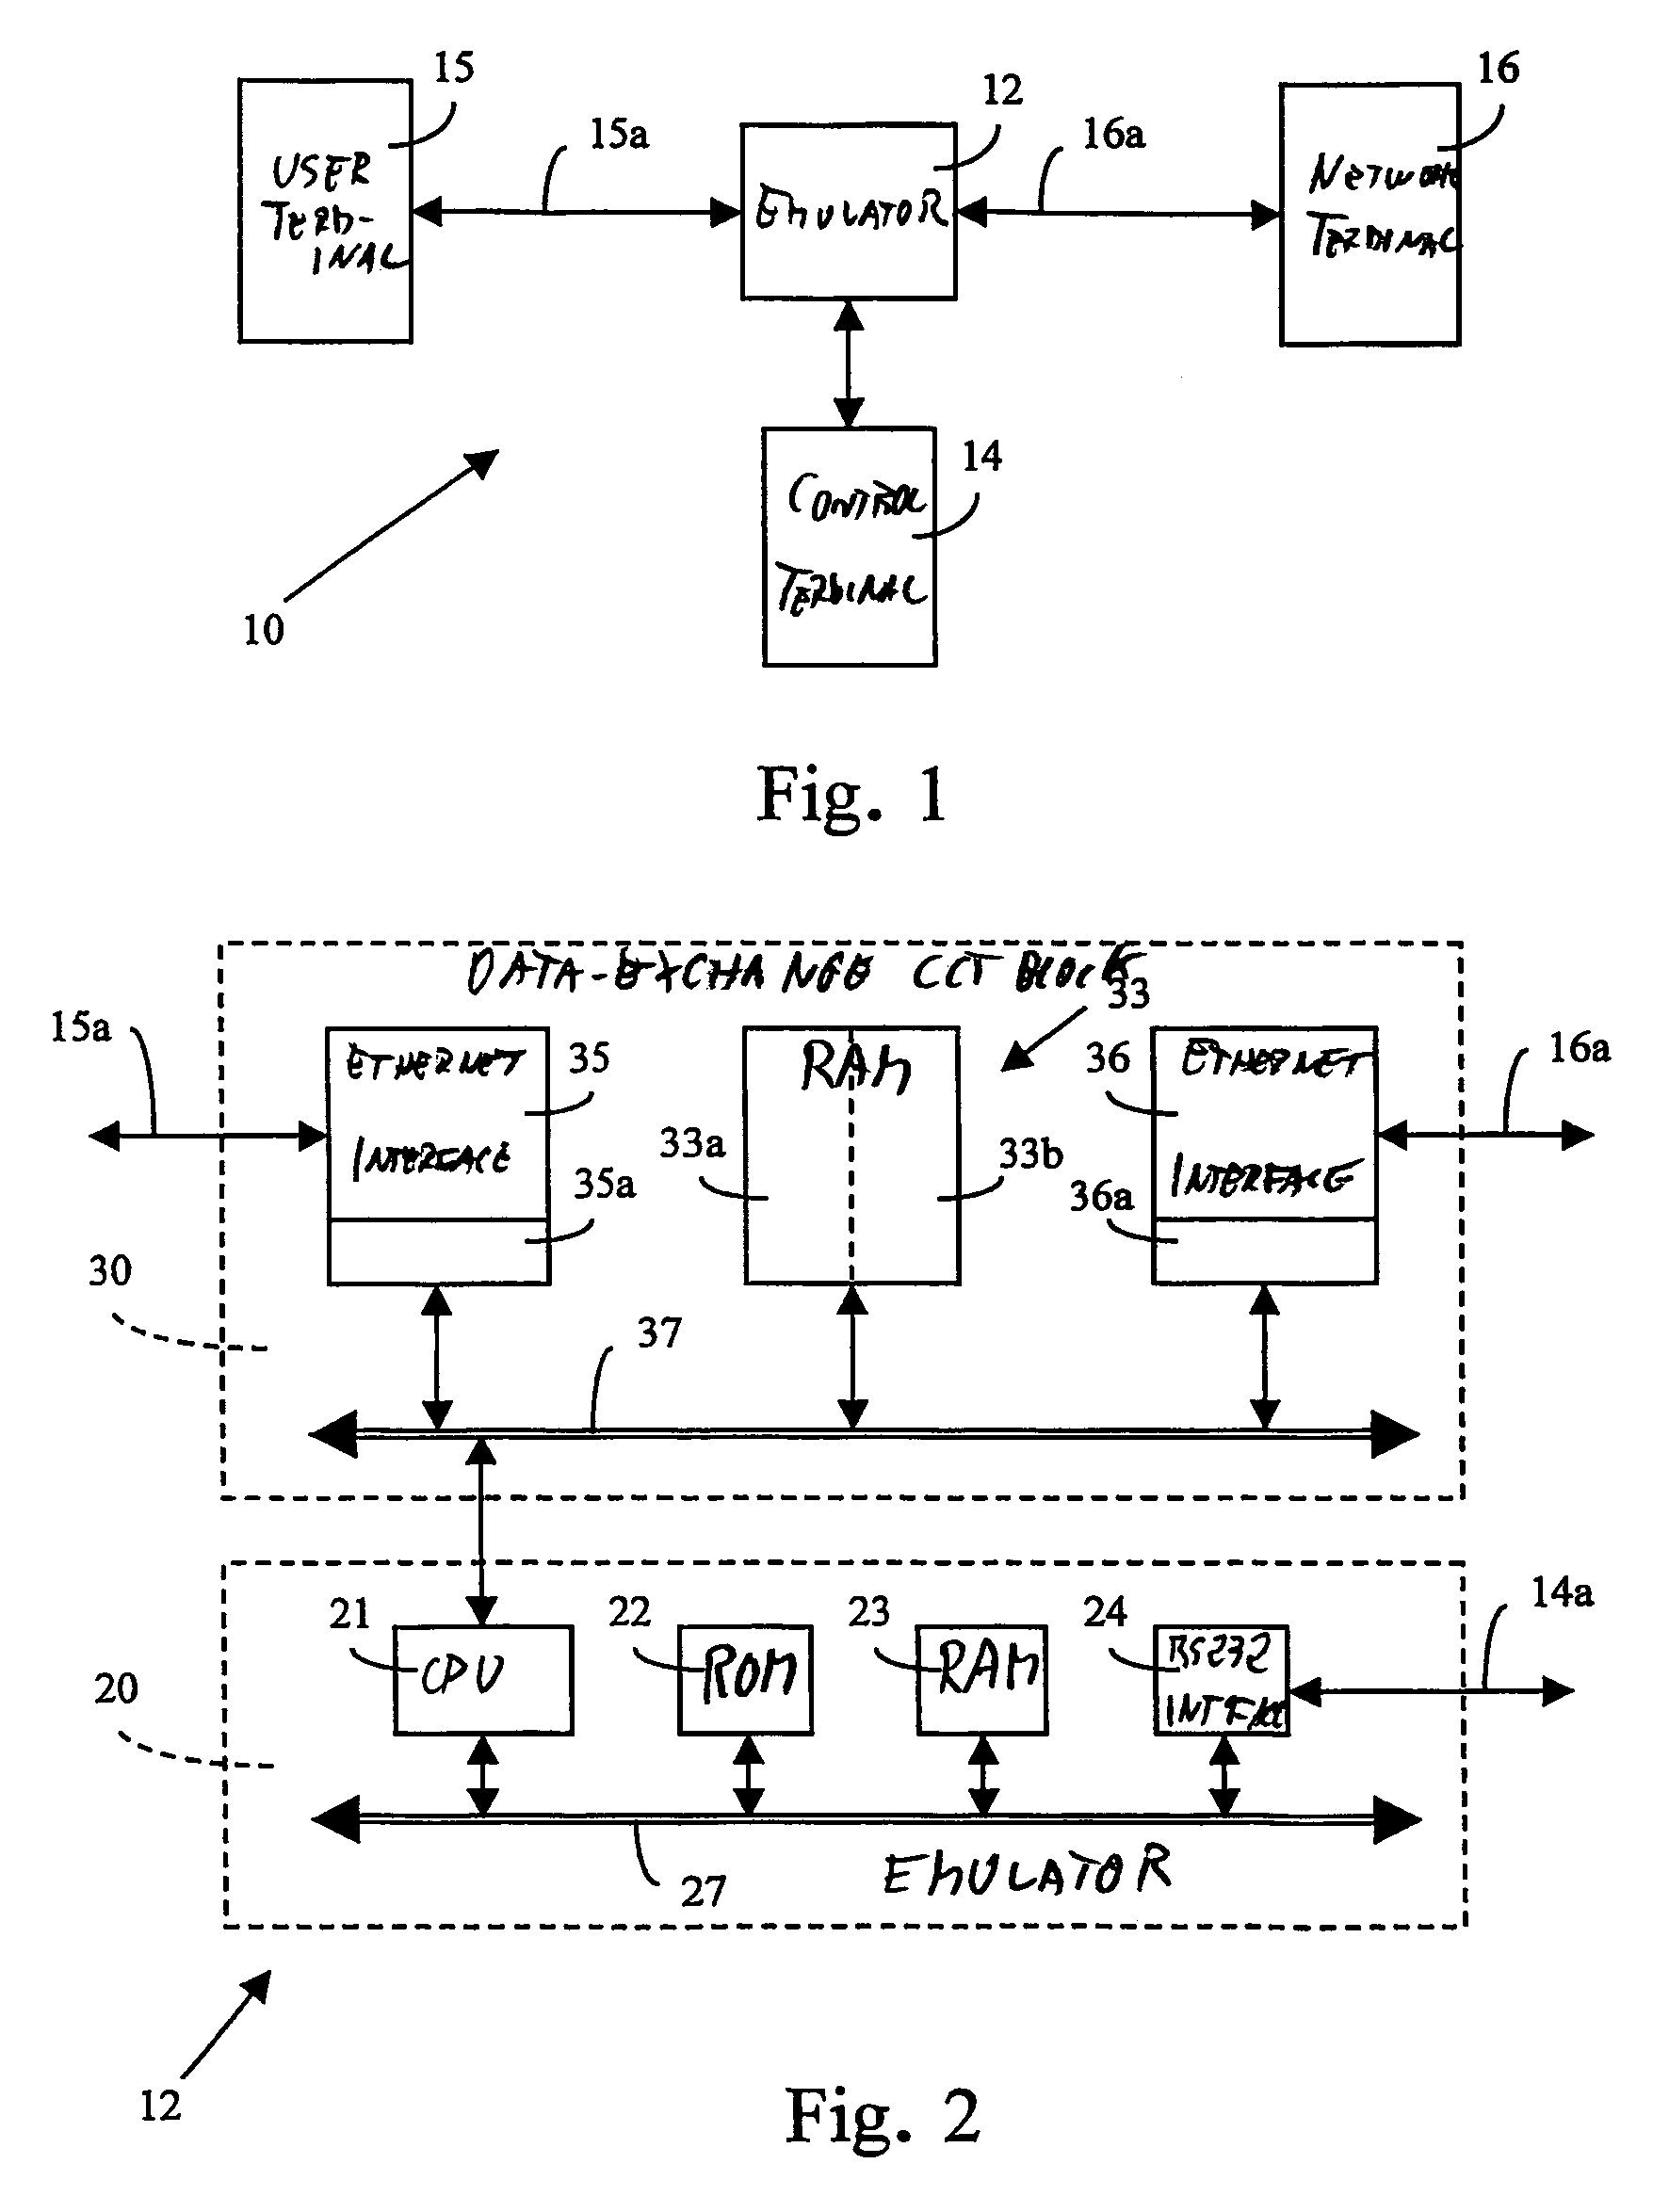 System and method for emulating mobile networks and related device